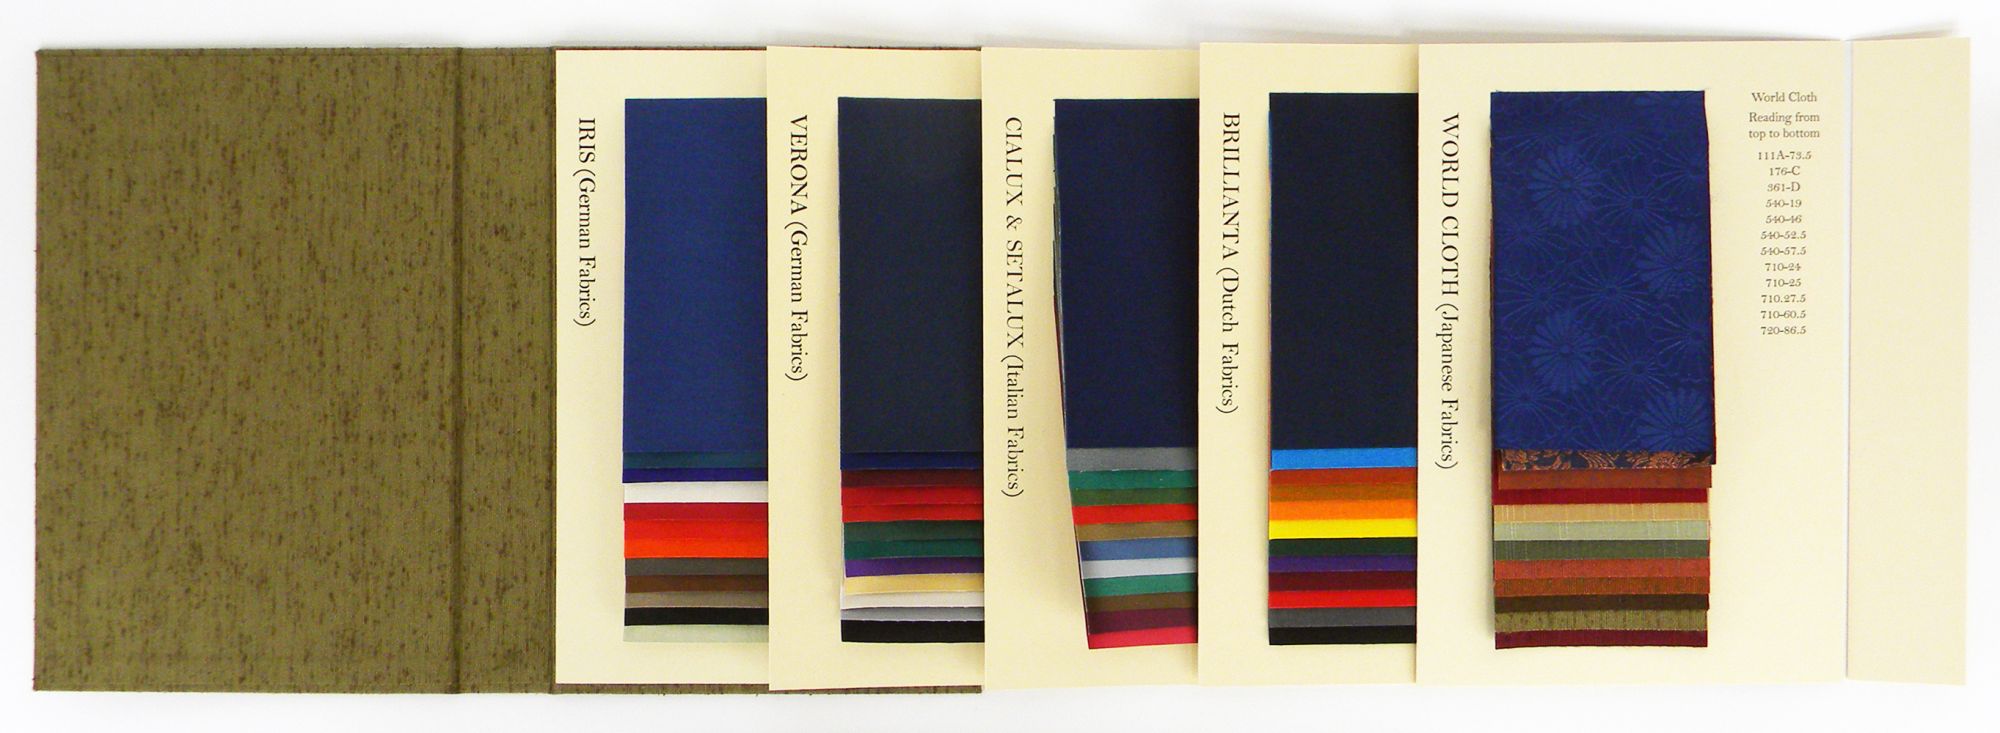 Cialux Bookcloth for Bookbinding